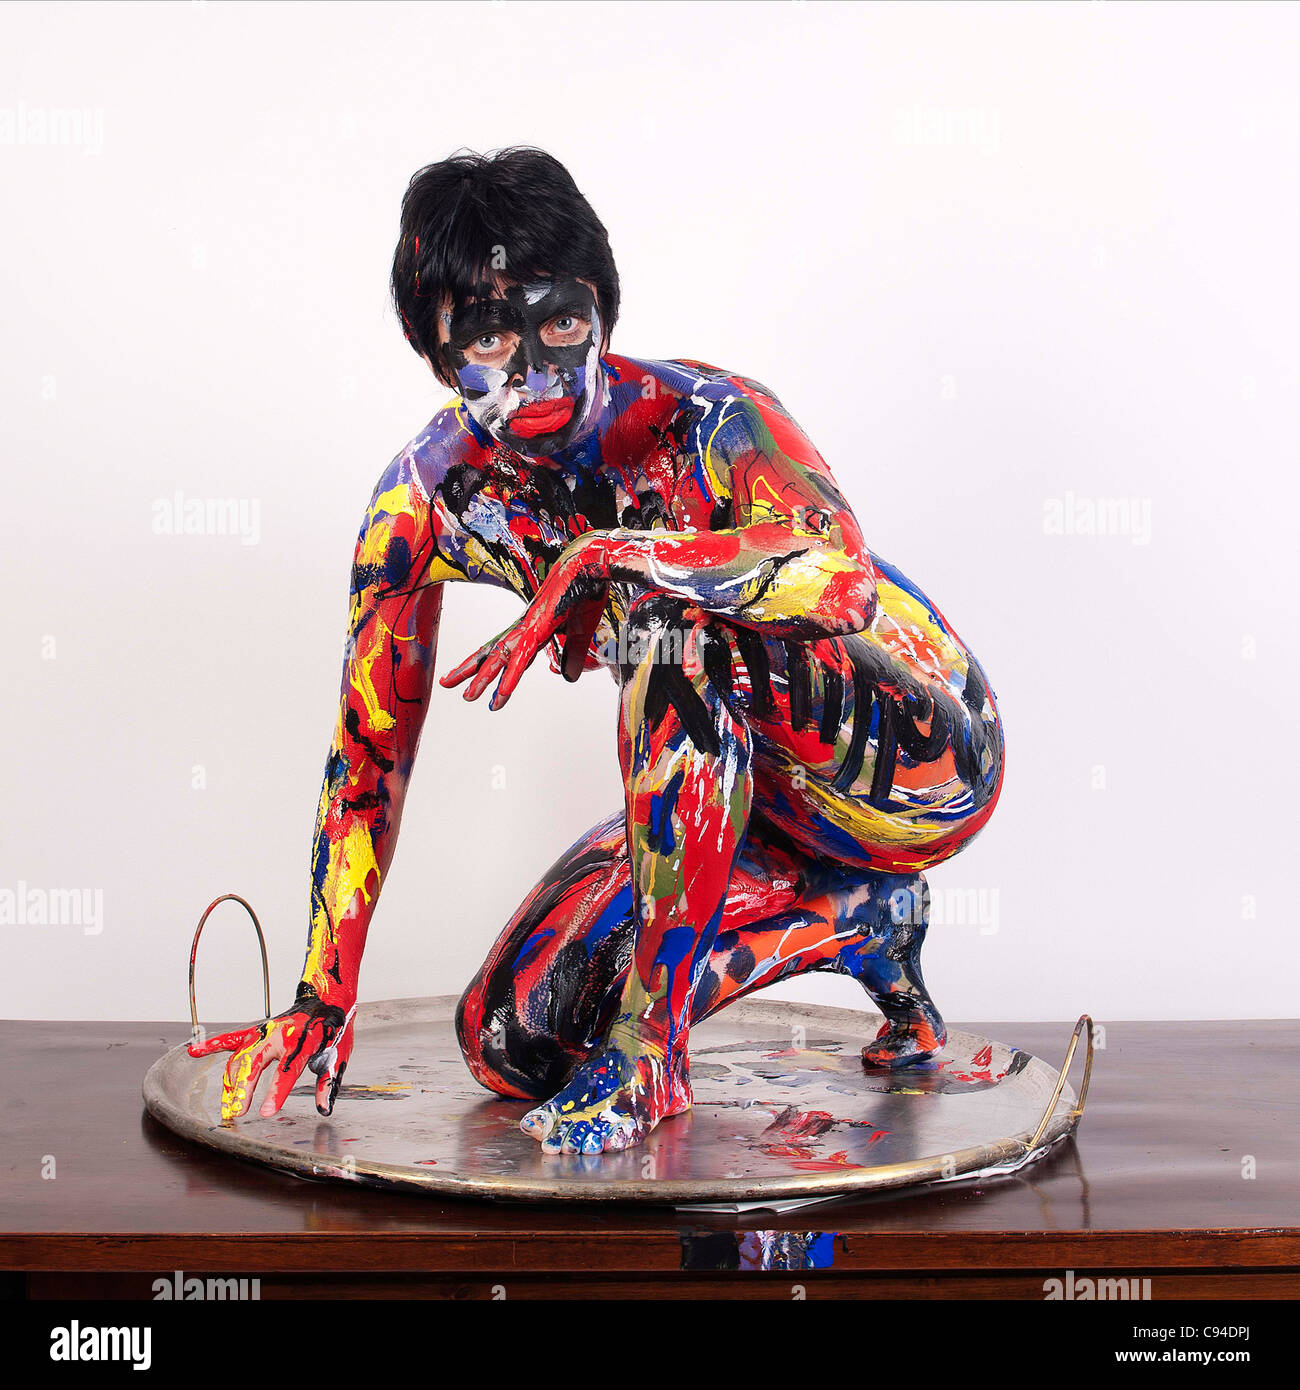 The Body Painting Stock Photo 40051274 Alamy